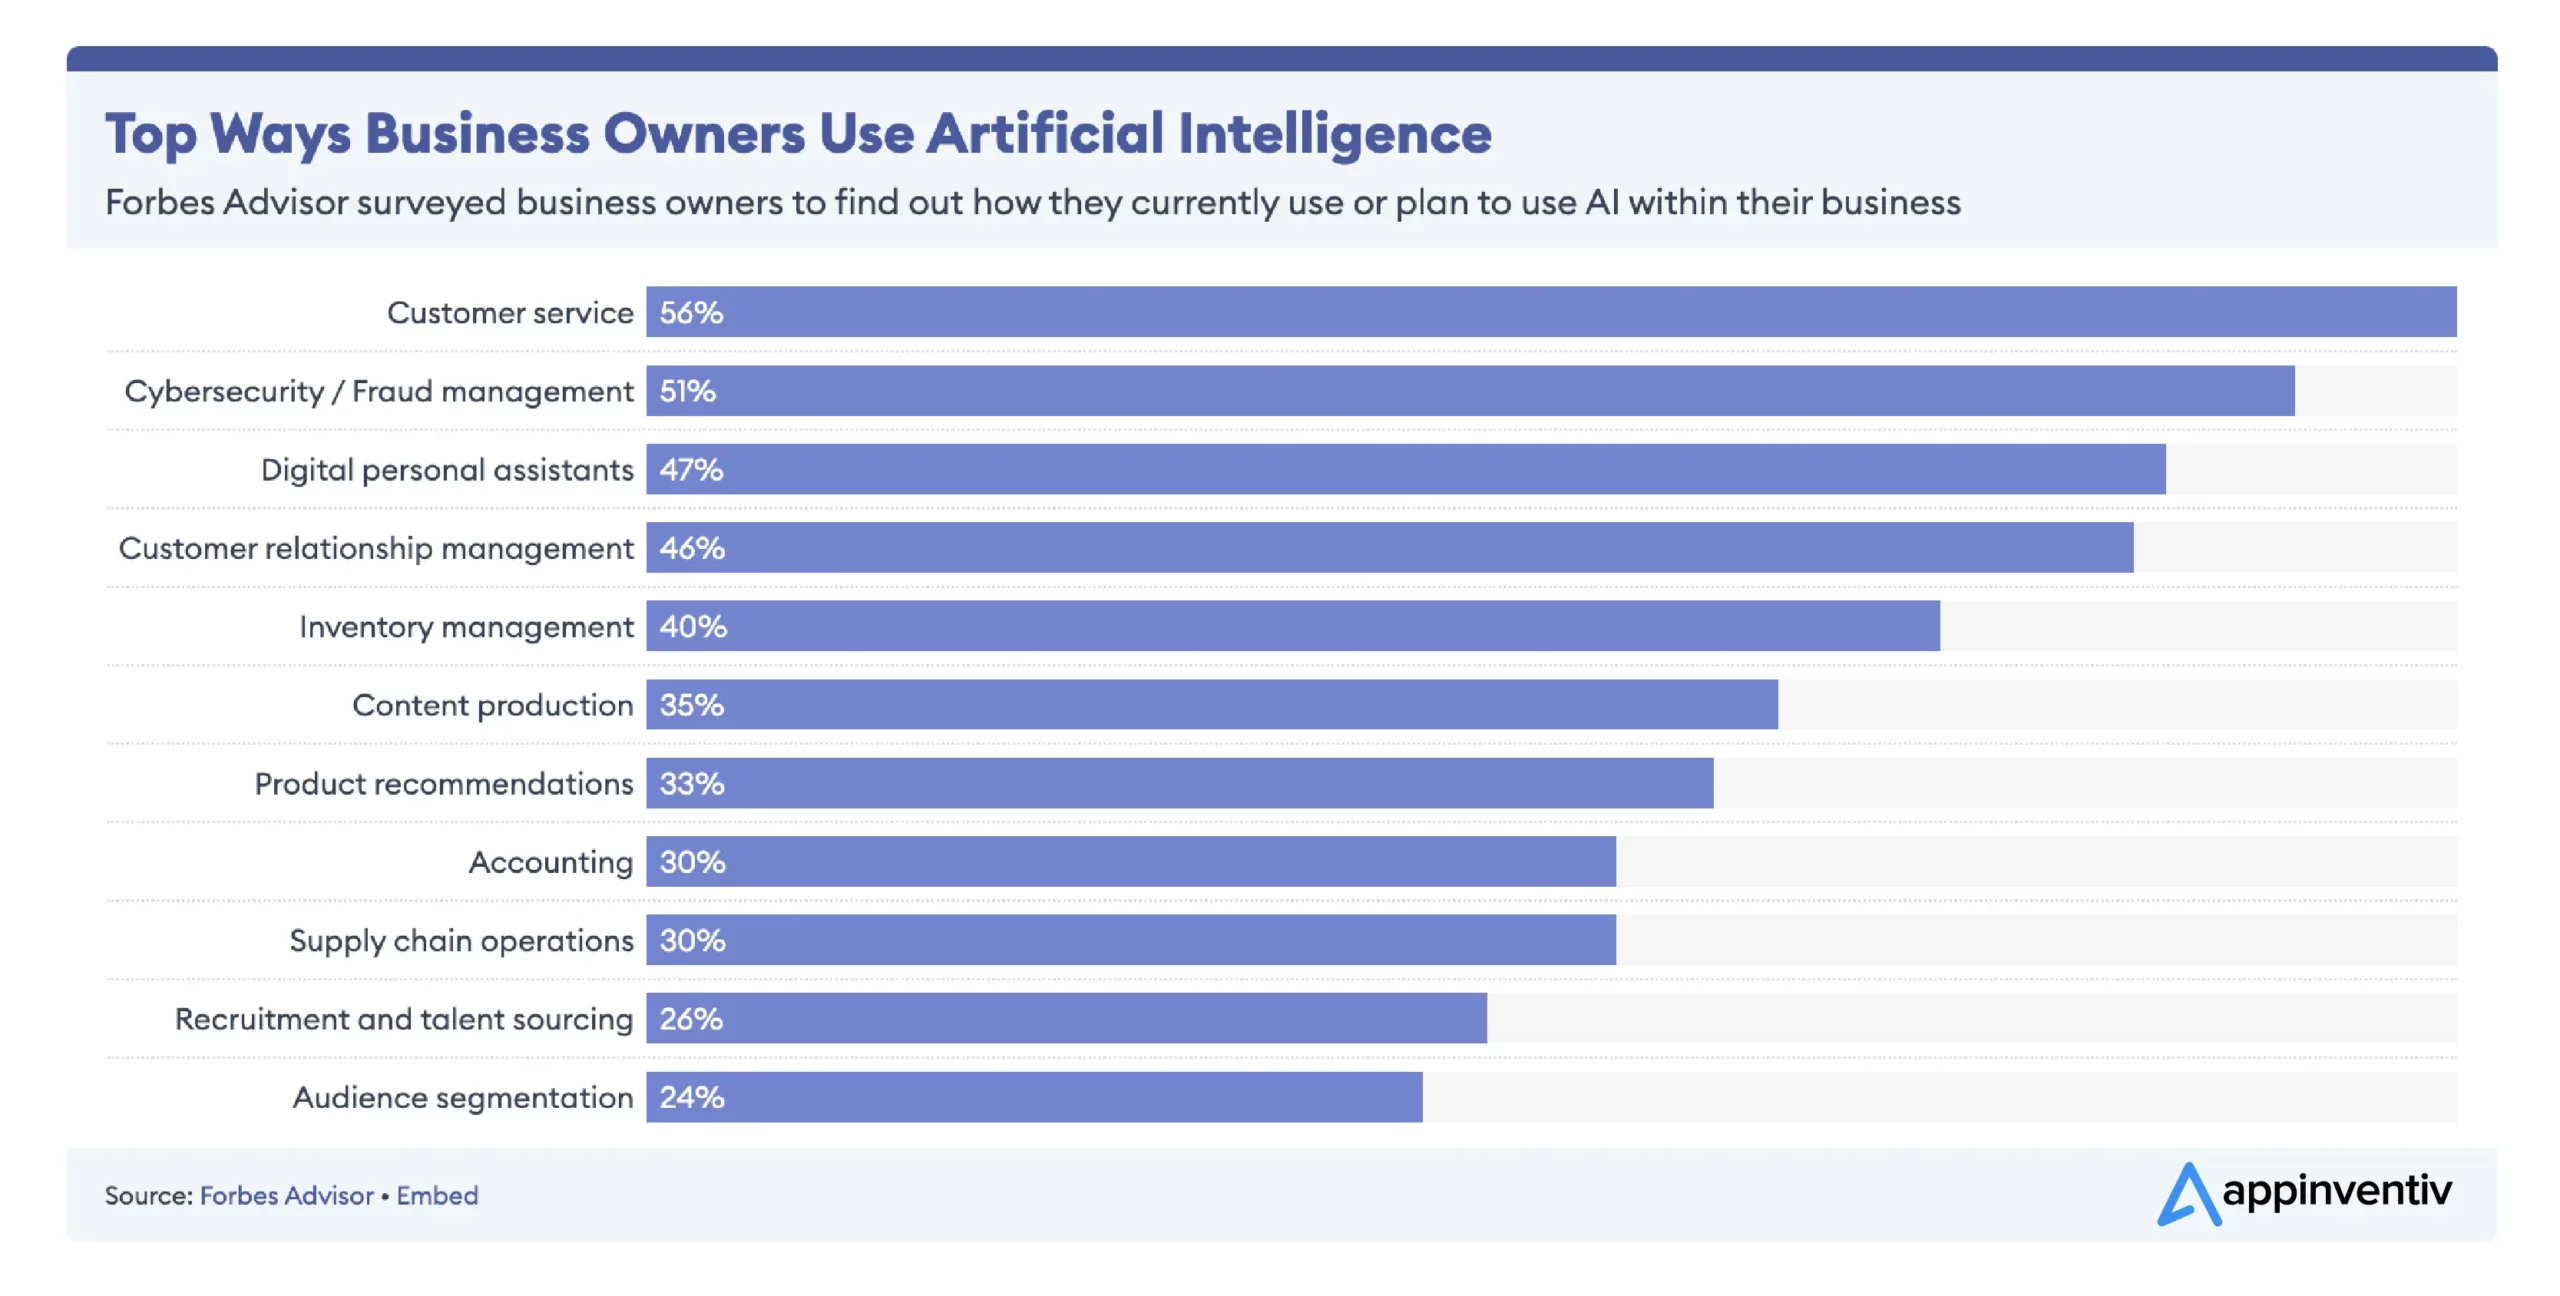 Business owners use Artificial Intelligence